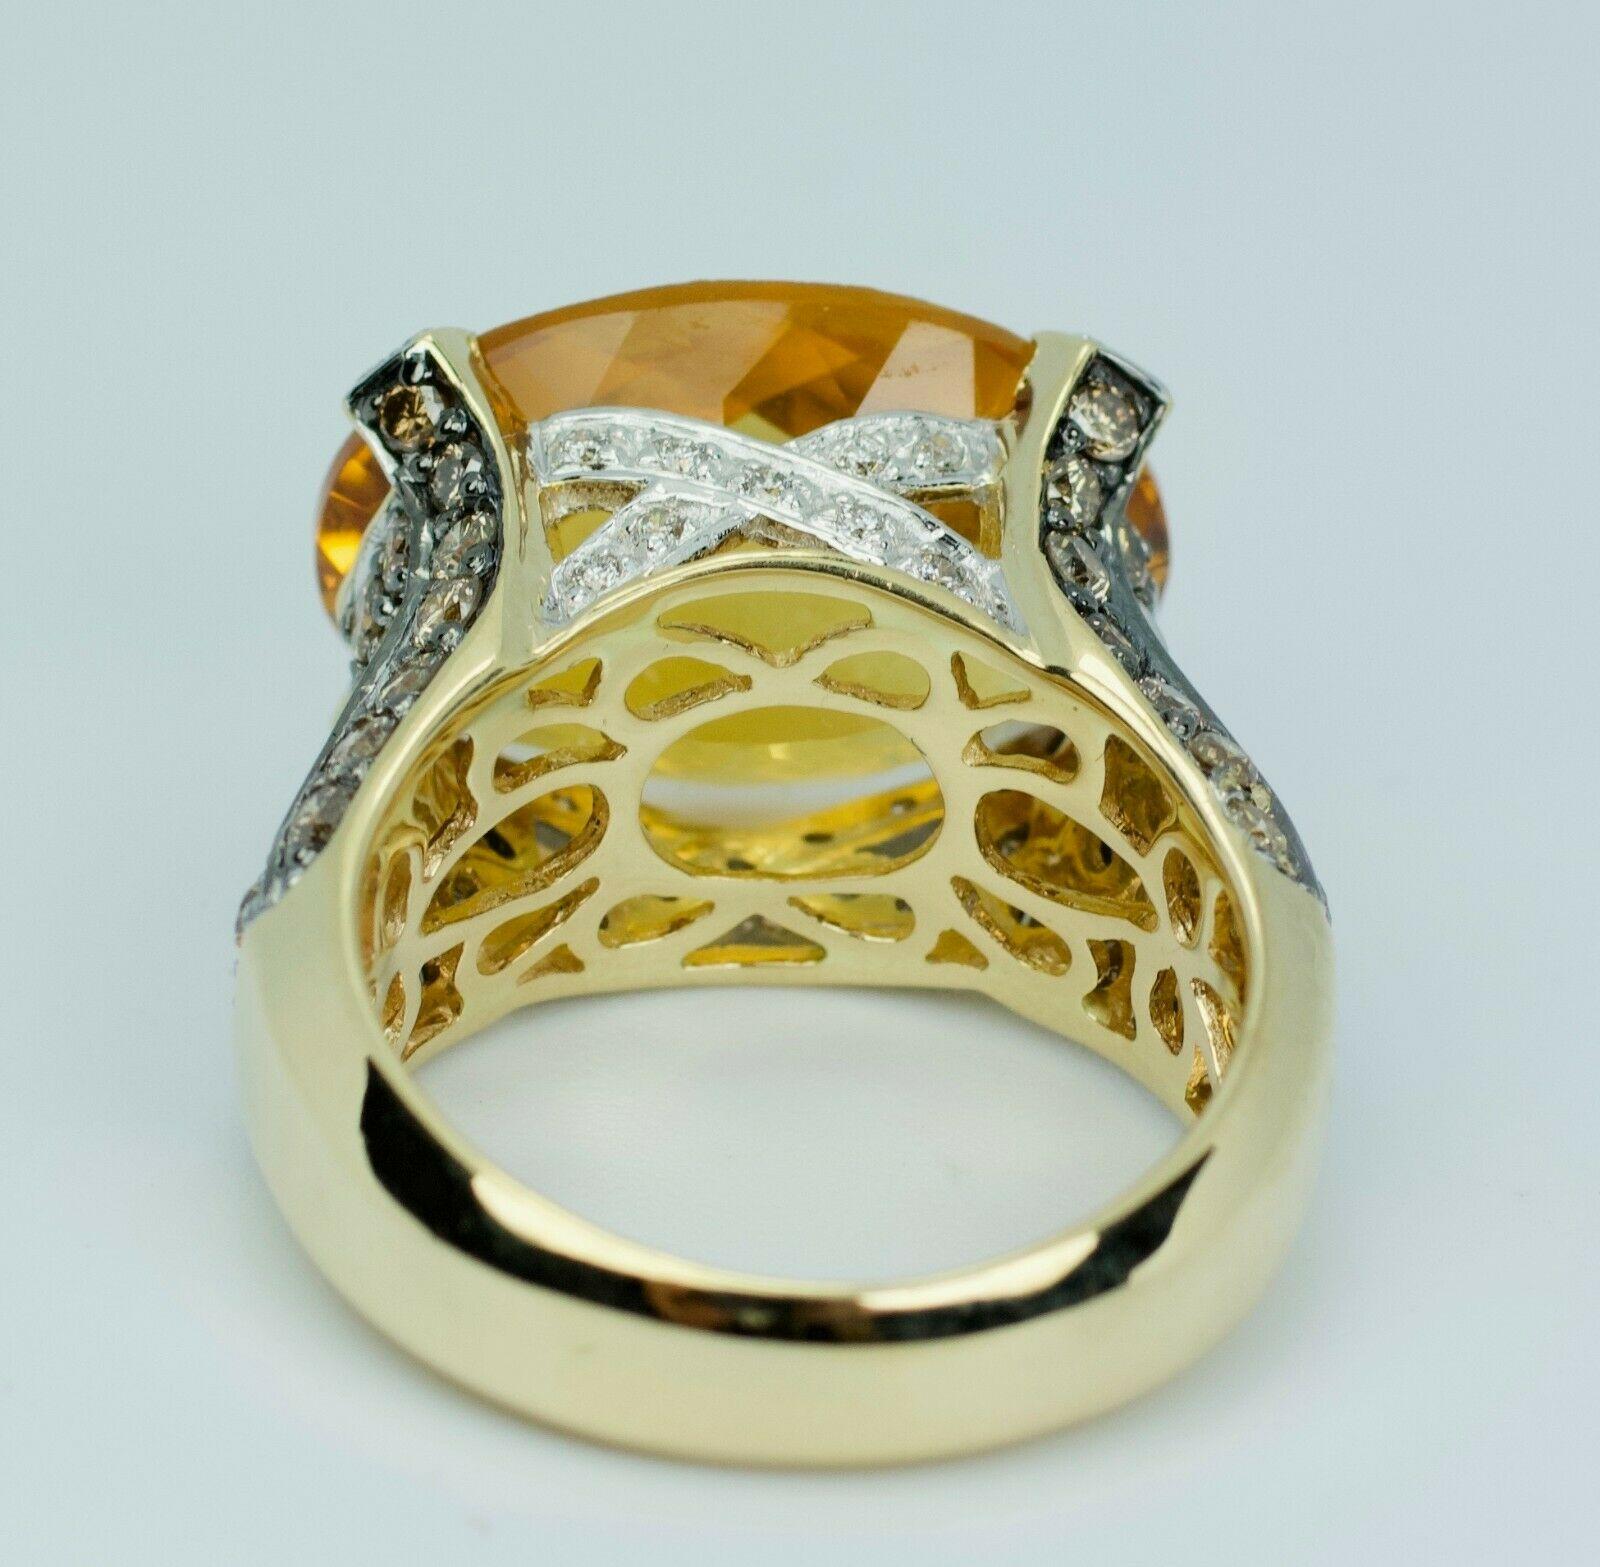 Le Vian 14 Karat Gold Oval Checkerboard Citrine and Chocolate Diamond Ring 1